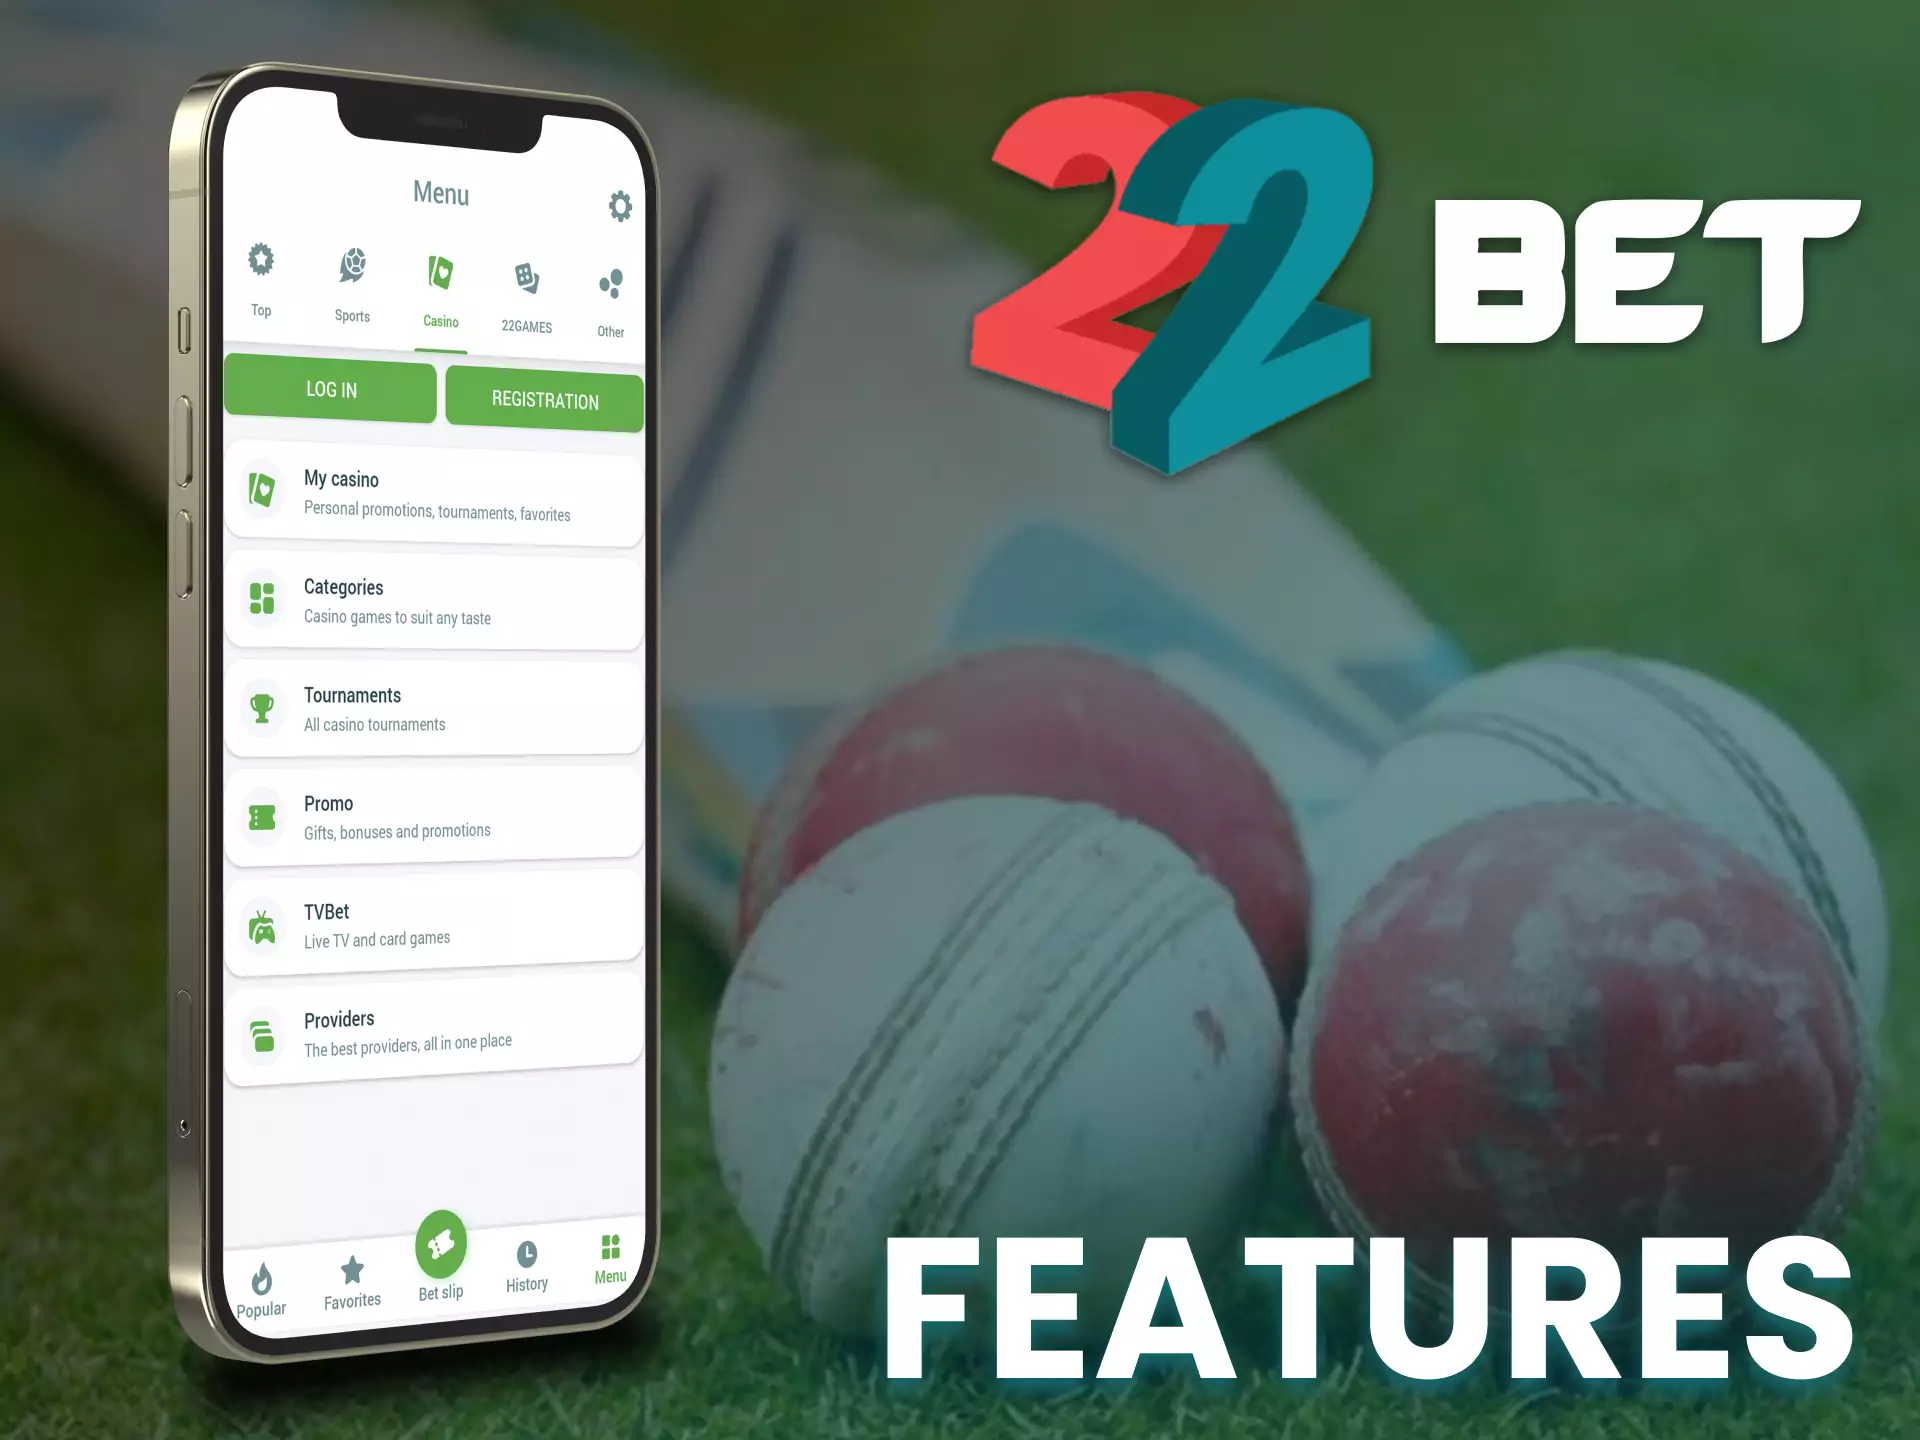 The 22bet app has many handy features.